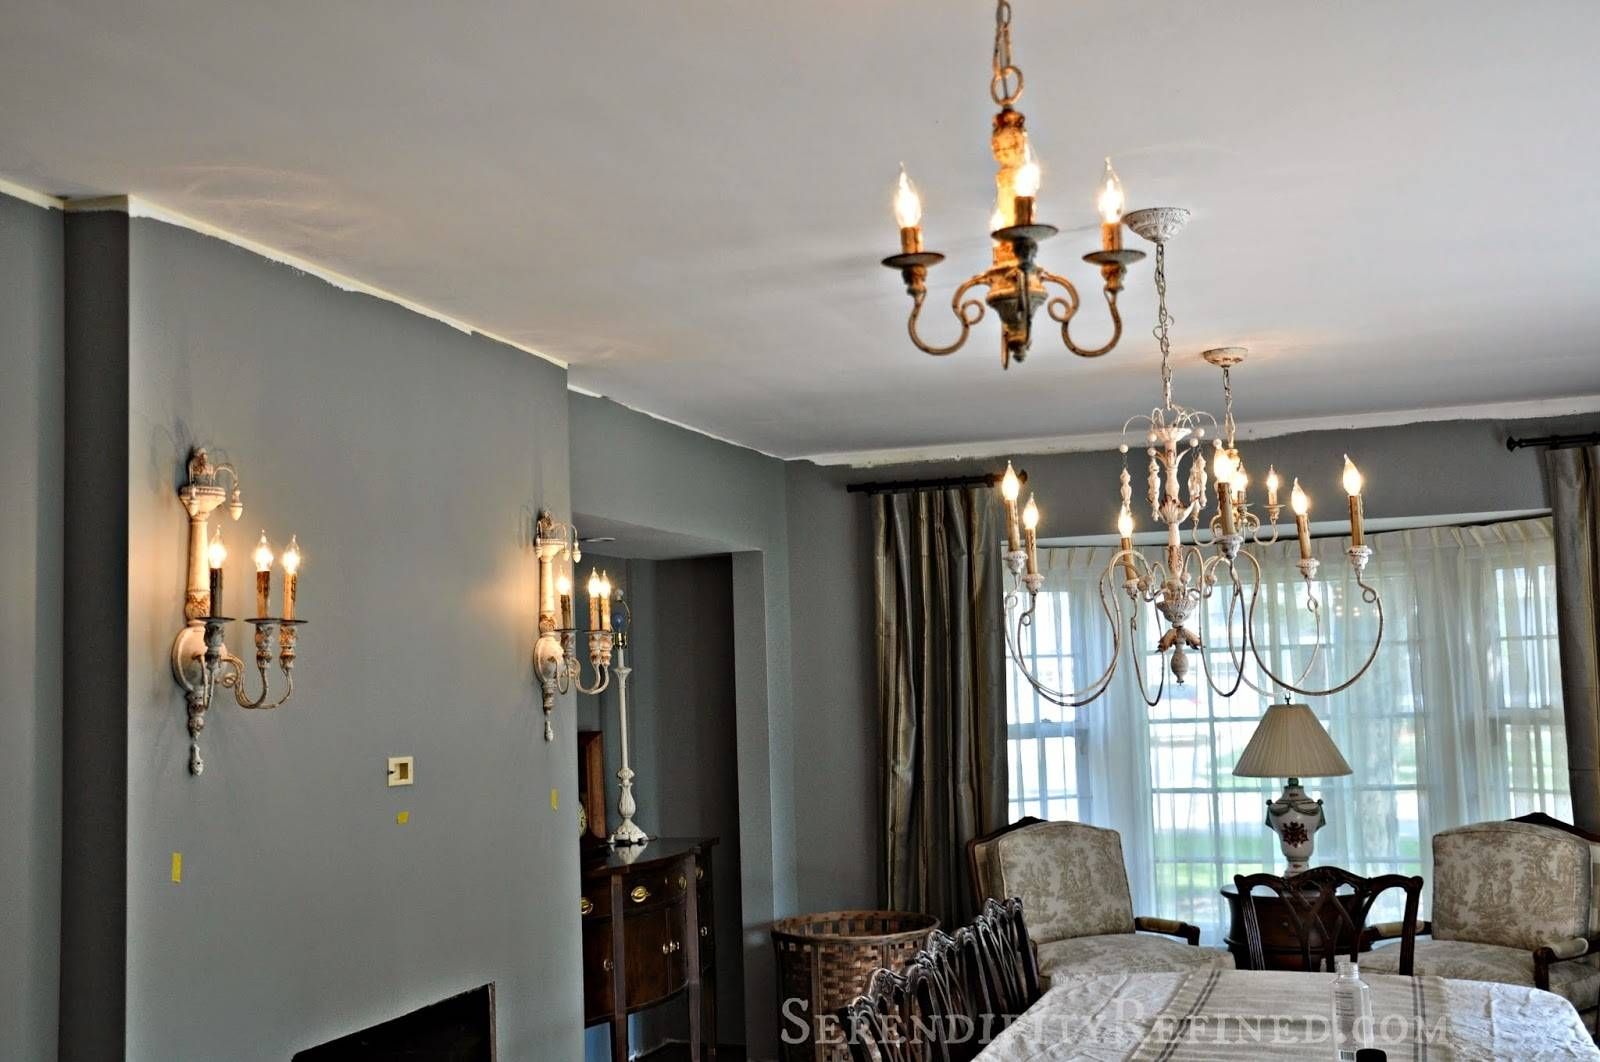 Serendipity Refined Blog: French Country Light Fixtures For The With Regard To French Style Ceiling Lights (View 13 of 15)